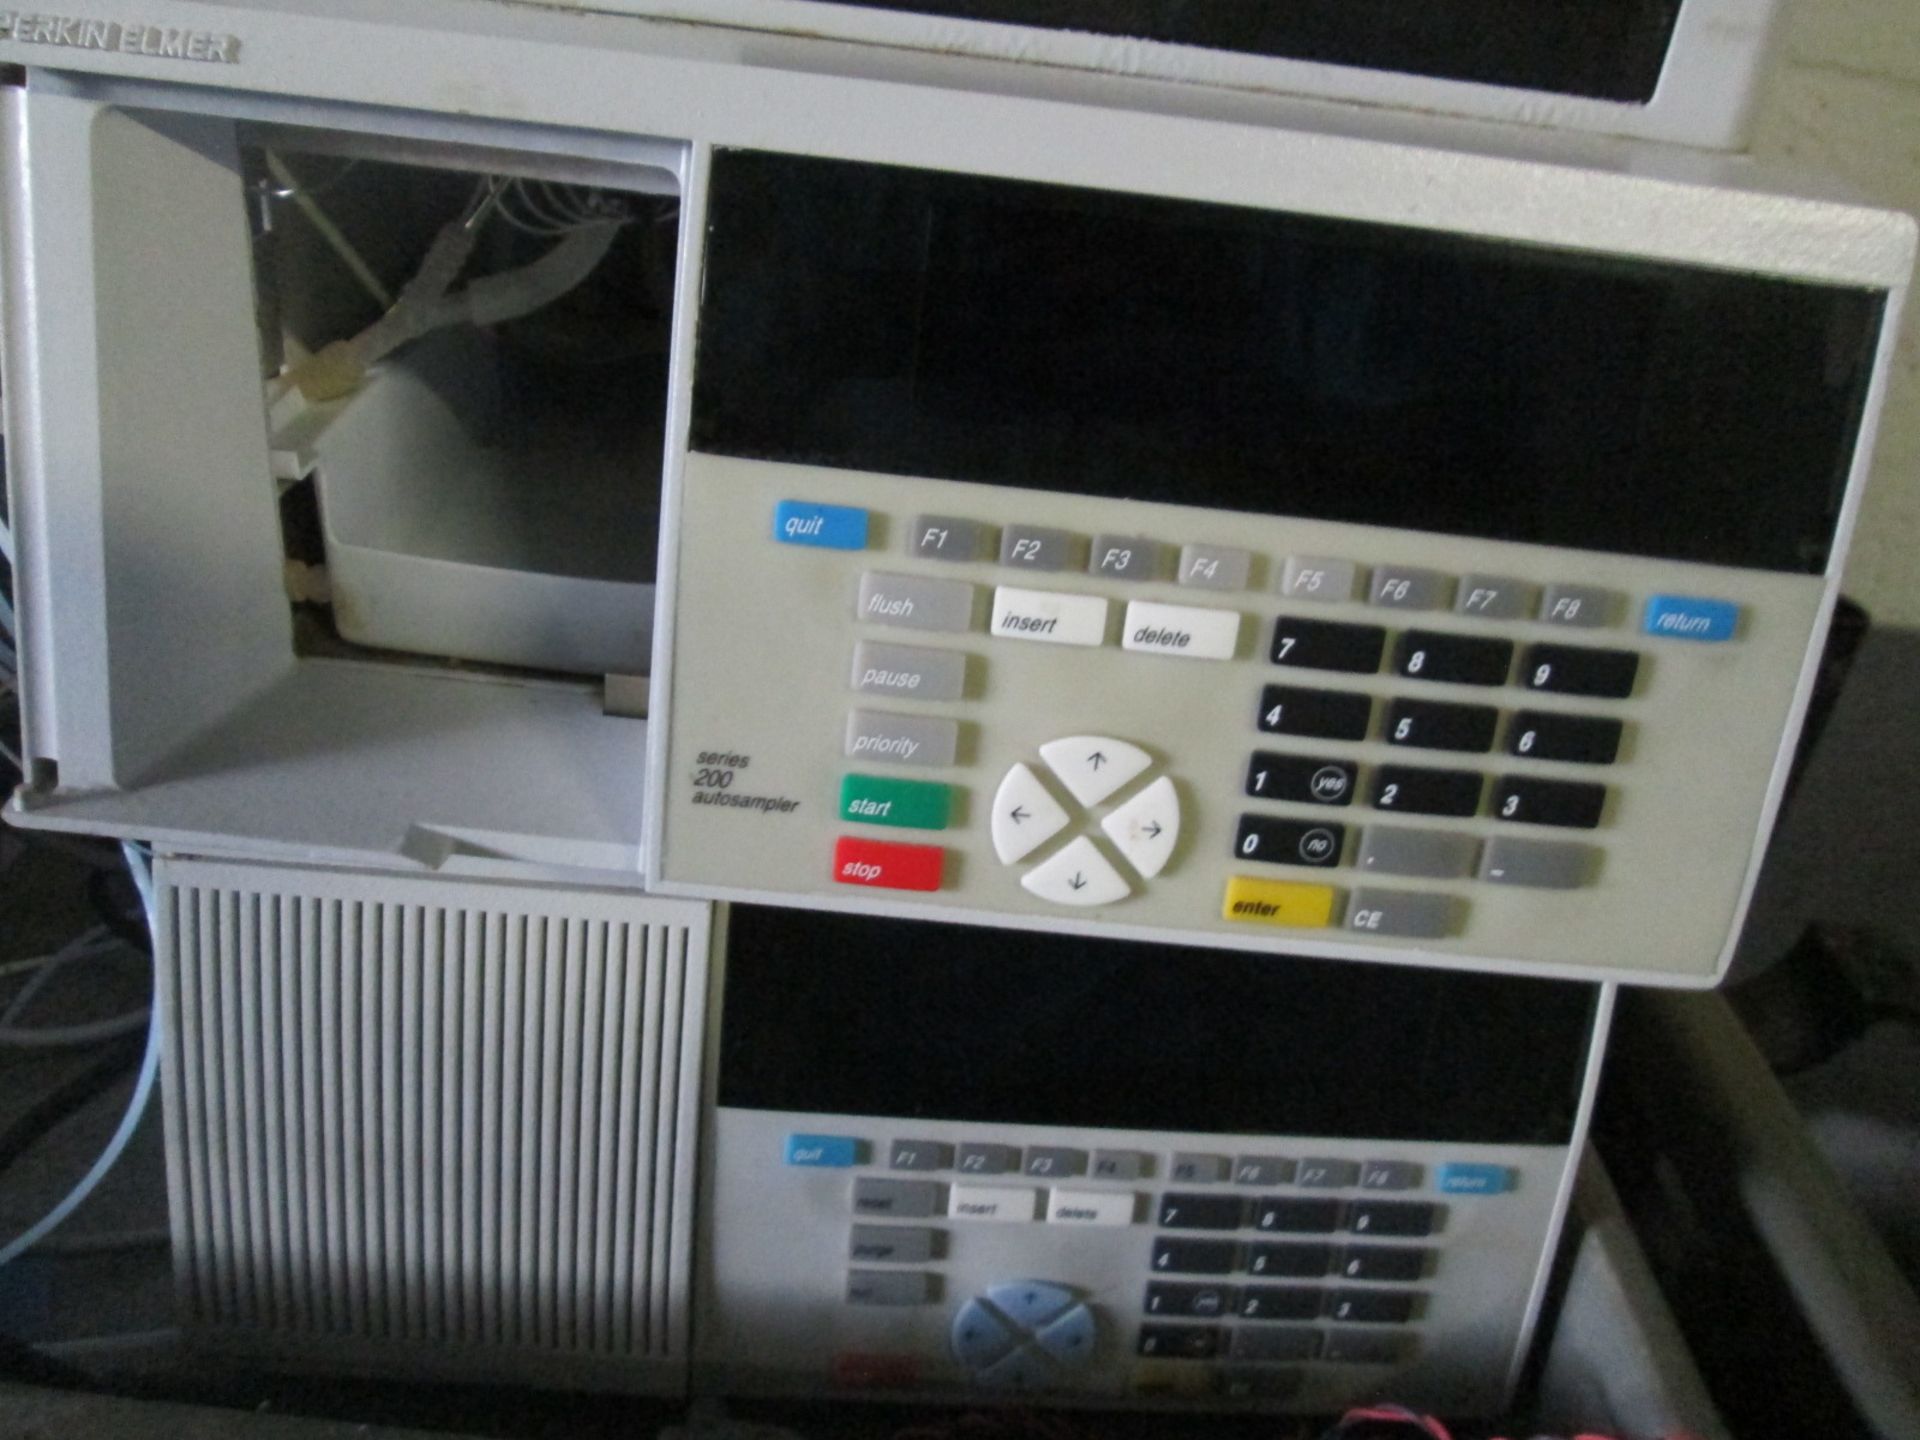 HPLC System / Applied Bio Systems Absorbance Detector / AutoSampler / Pumps / IT Gear etc. - Image 14 of 18